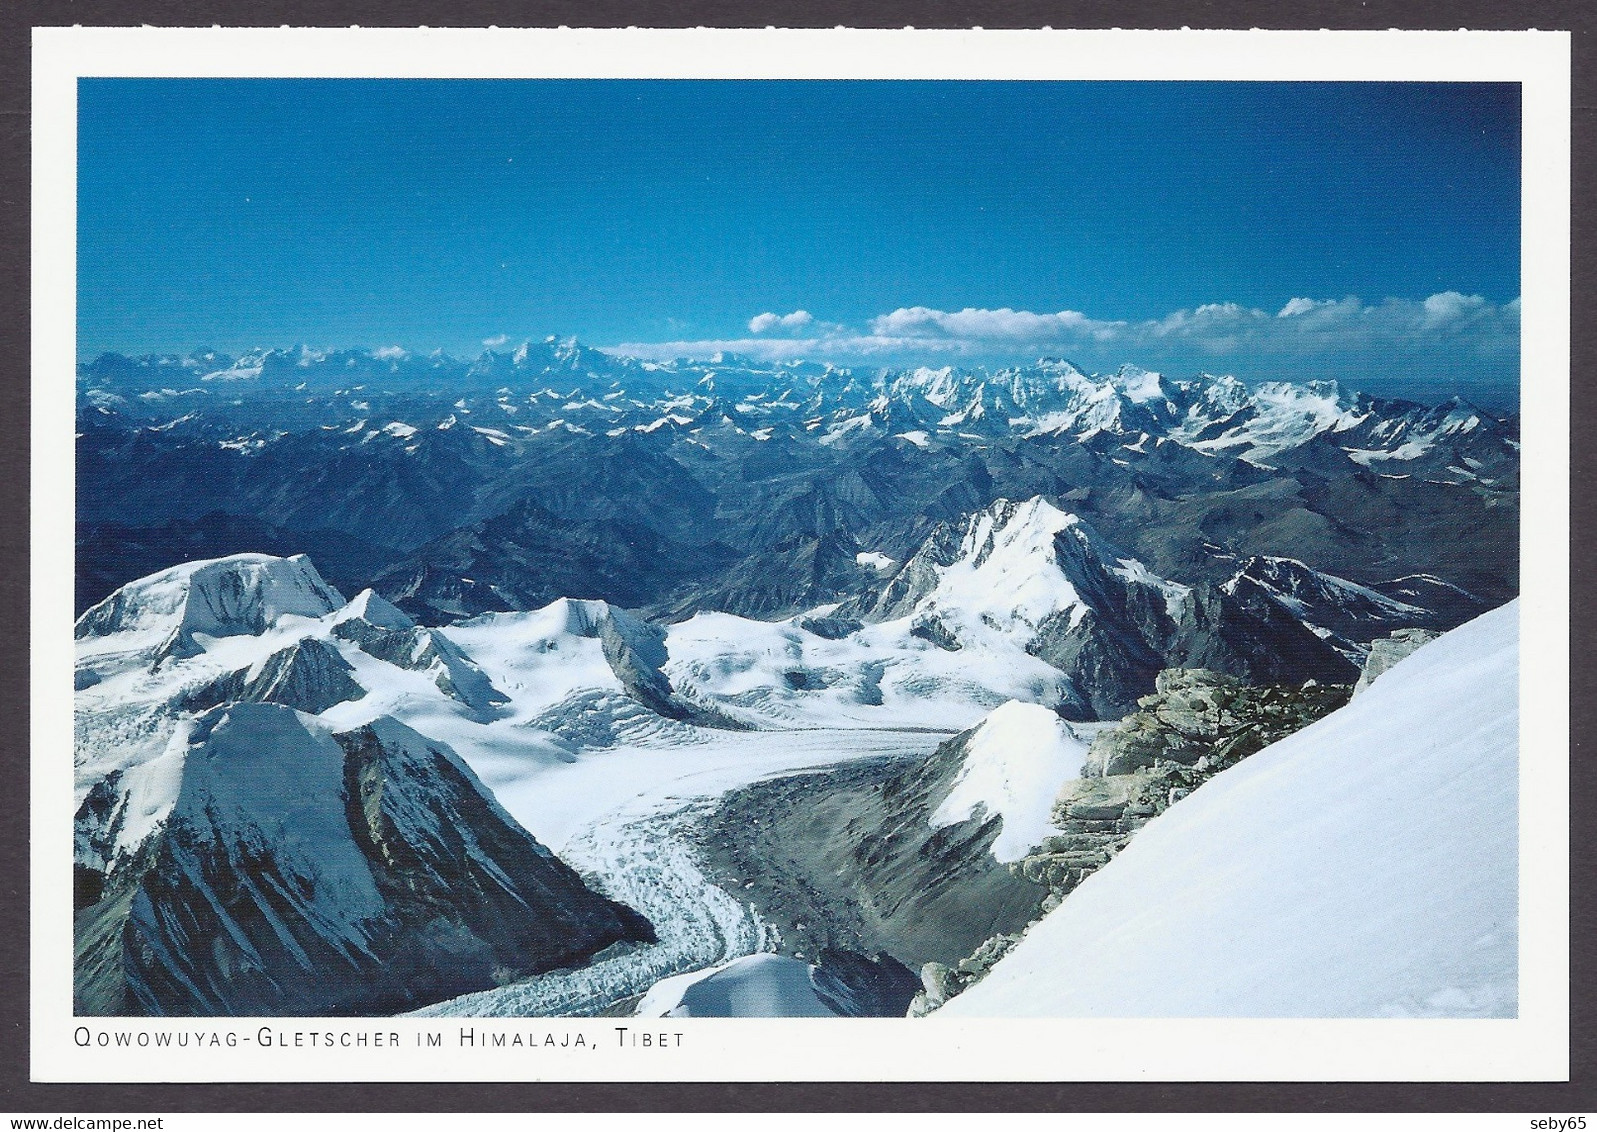 Nepal - Mount Qowowuyag Glacier, Gletscher In The Himalayas, Tibet, Mountains, Berge, View From The Top Himalaya - Nepal